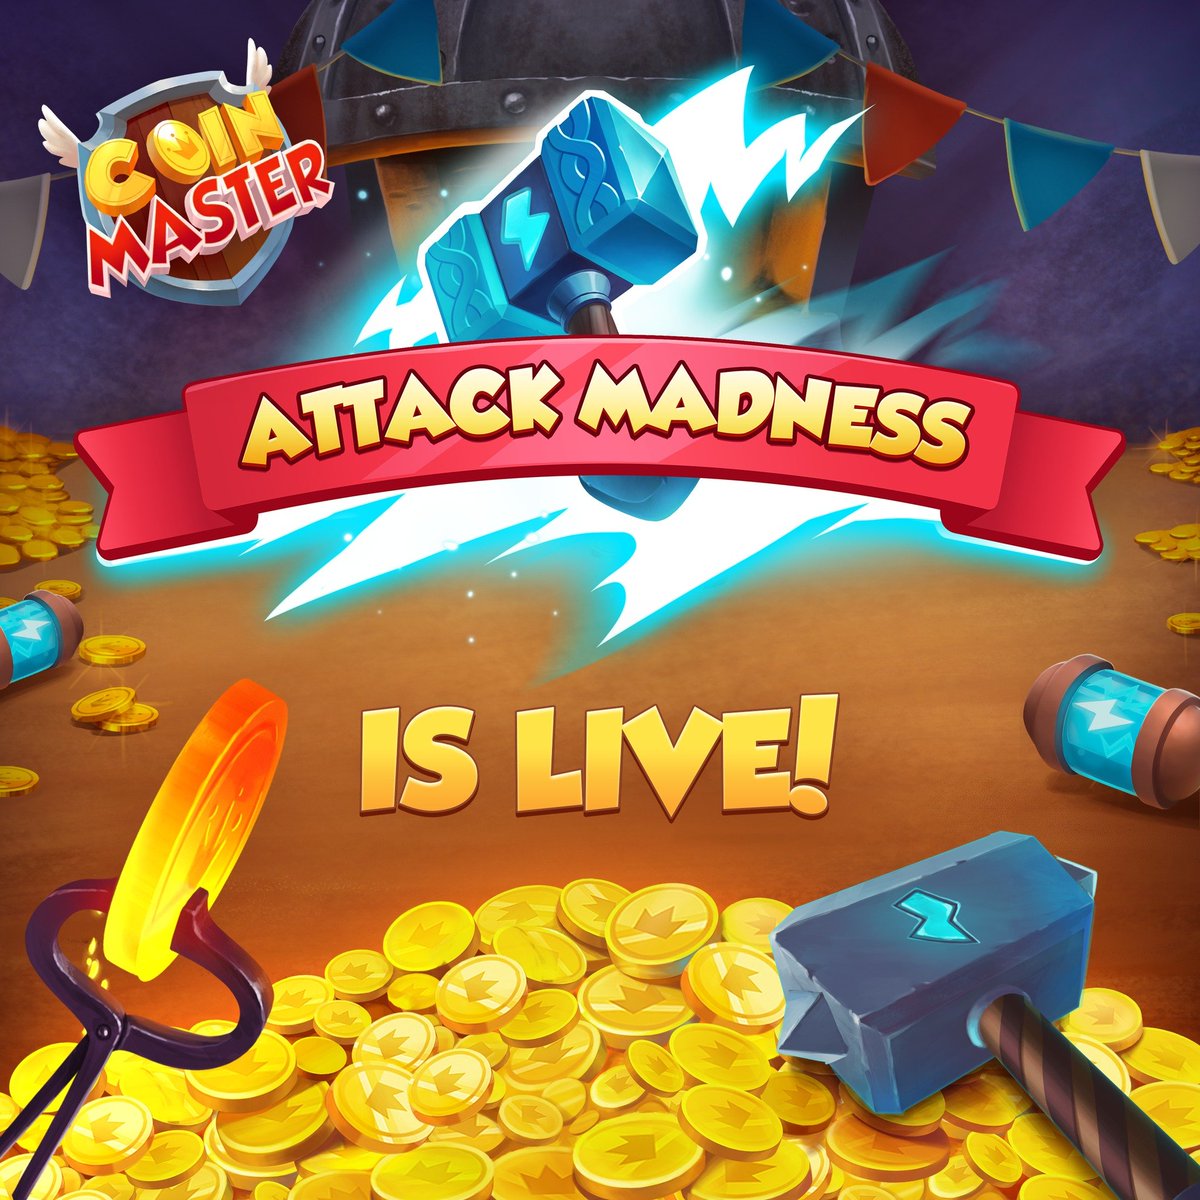 🎉Claim 40K Spins Now 🍎
➡️Like 😍🥎
➡️Retweet 😍🚌
➡️Comment: ok  🎉🎂🎁
Collect spins on
➡️ theunlock.net/439e054

Please don't skip any steps

#coinmaster #coinmasterfreespins 
#coinmasterfreespinlink #usa #uk #london #freespins #Italy #spin #italydidit #Spain #FridayFeeling